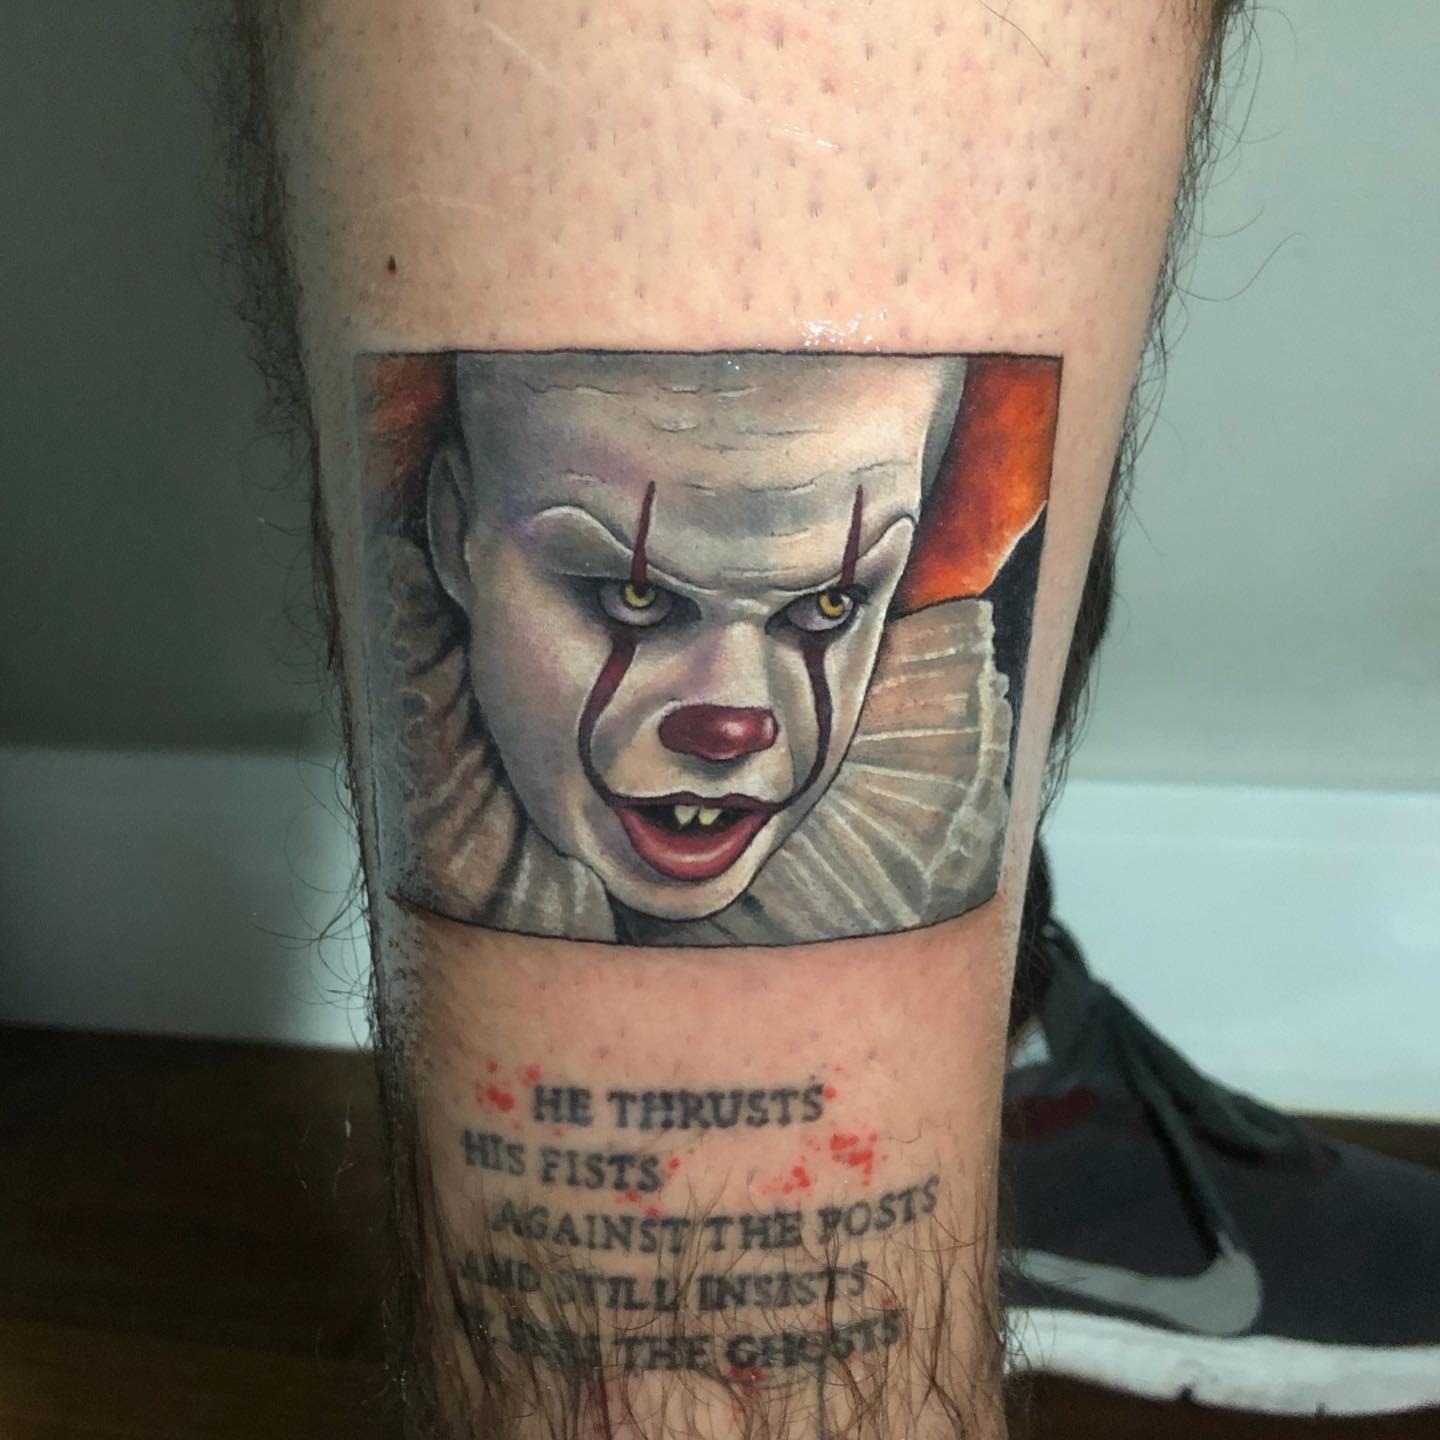 My new Pennywise tattoo  rstephenking